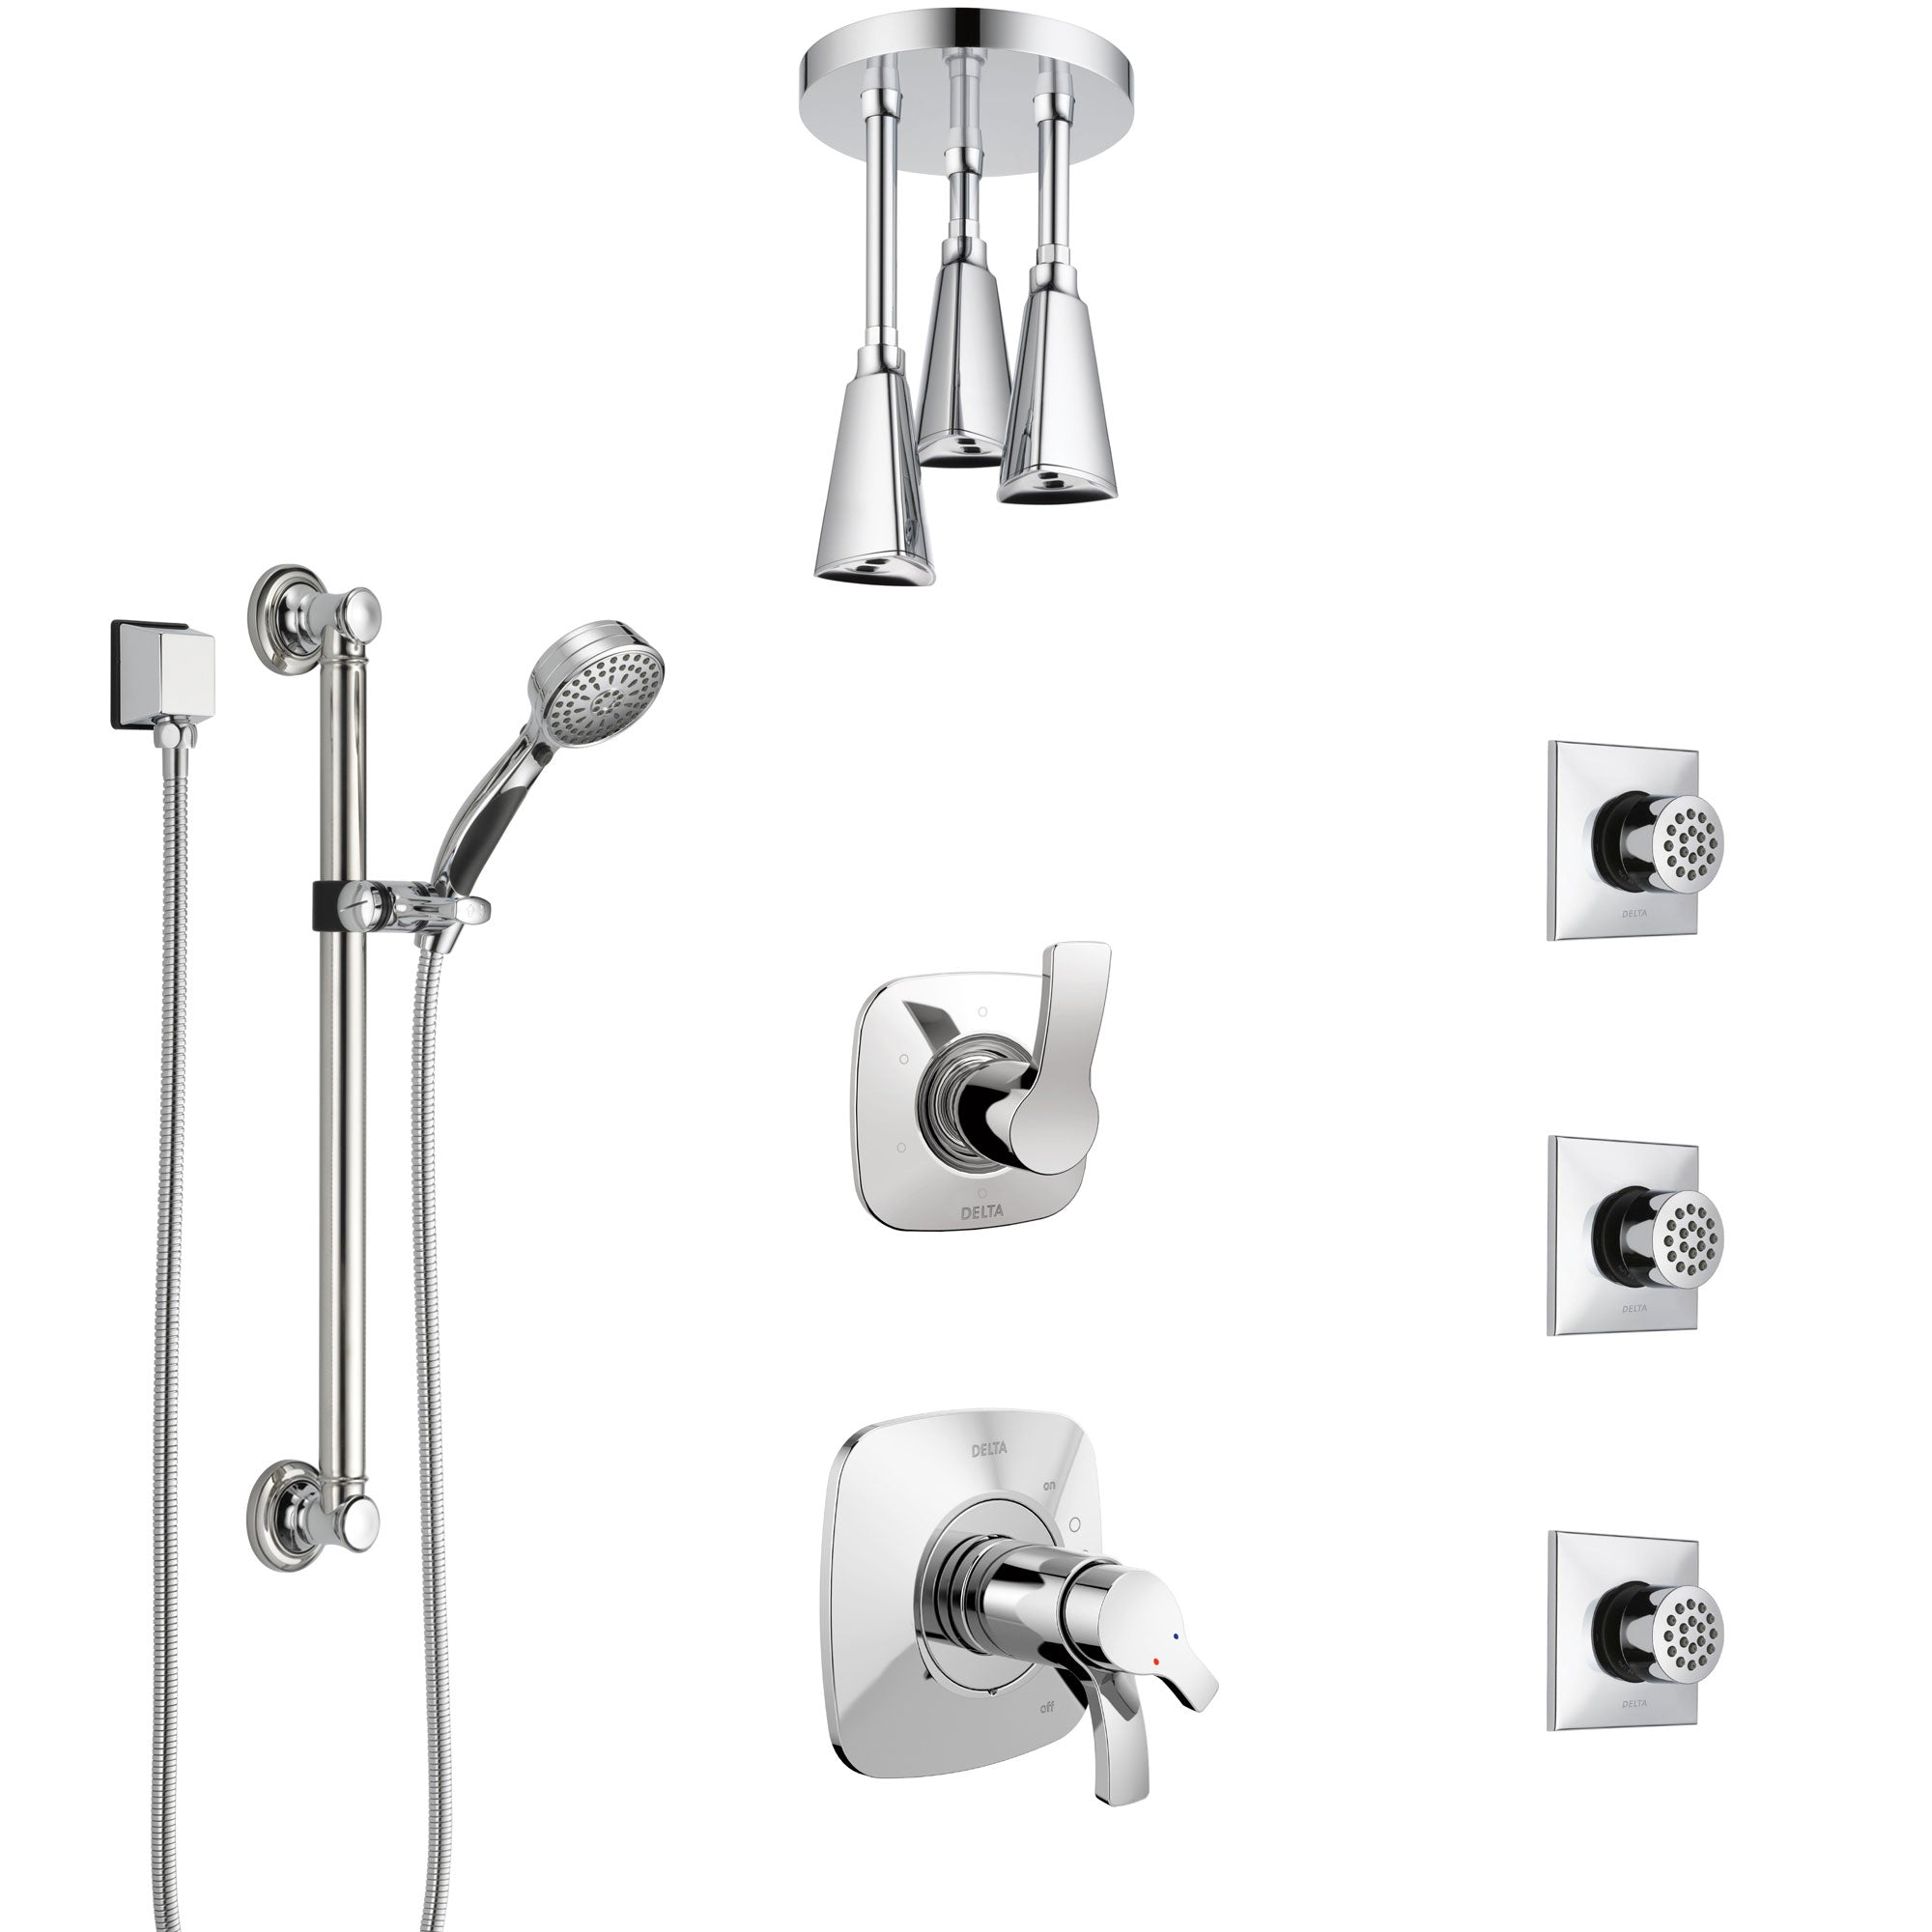 Delta Tesla Chrome Shower System with Dual Thermostatic Control, Diverter, Ceiling Mount Showerhead, 3 Body Sprays, and Grab Bar Hand Shower SS17T5215